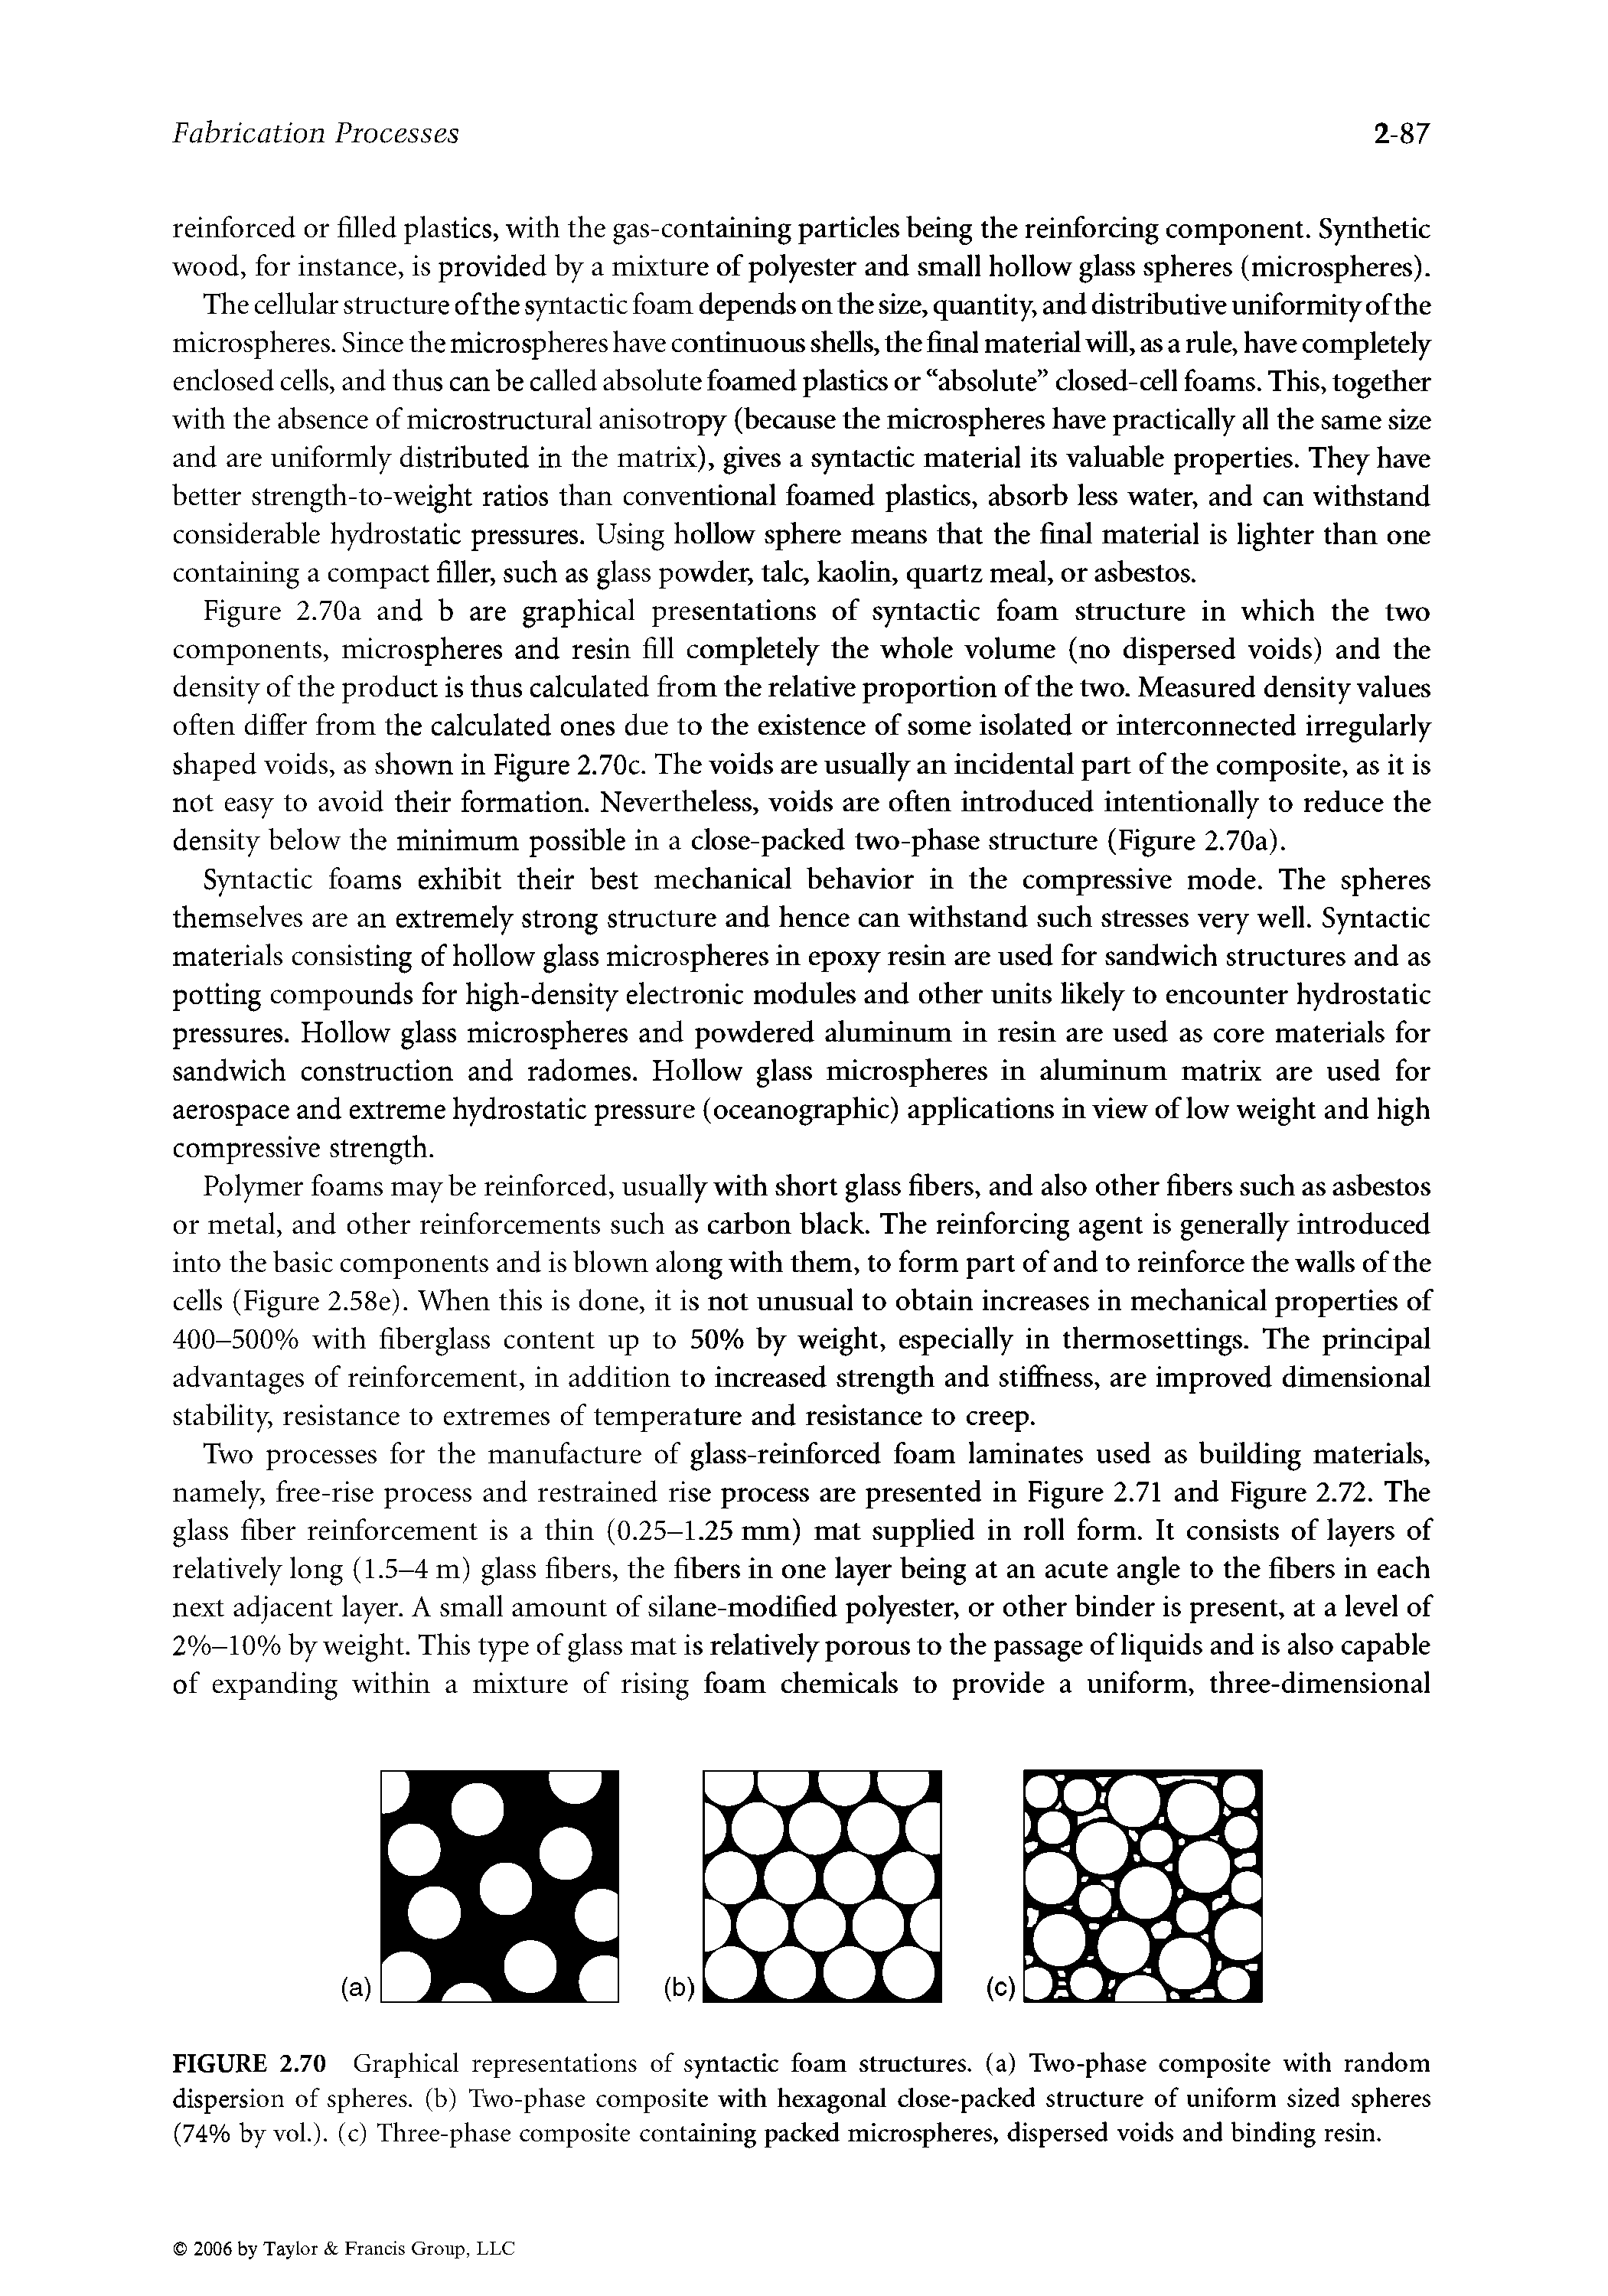 Figure 2.70a and b are graphical presentations of syntactic foam structure in which the two components, microspheres and resin fill completely the whole volume (no dispersed voids) and the density of the product is thus calculated from the relative proportion of the two. Measured density values often differ from the calculated ones due to the existence of some isolated or interconnected irregularly shaped voids, as shown in Figure 2.70c. The voids are usually an incidental part of the composite, as it is not easy to avoid their formation. Nevertheless, voids are often introduced intentionally to reduce the density below the minimum possible in a close-packed two-phase structure (Figure 2.70a).